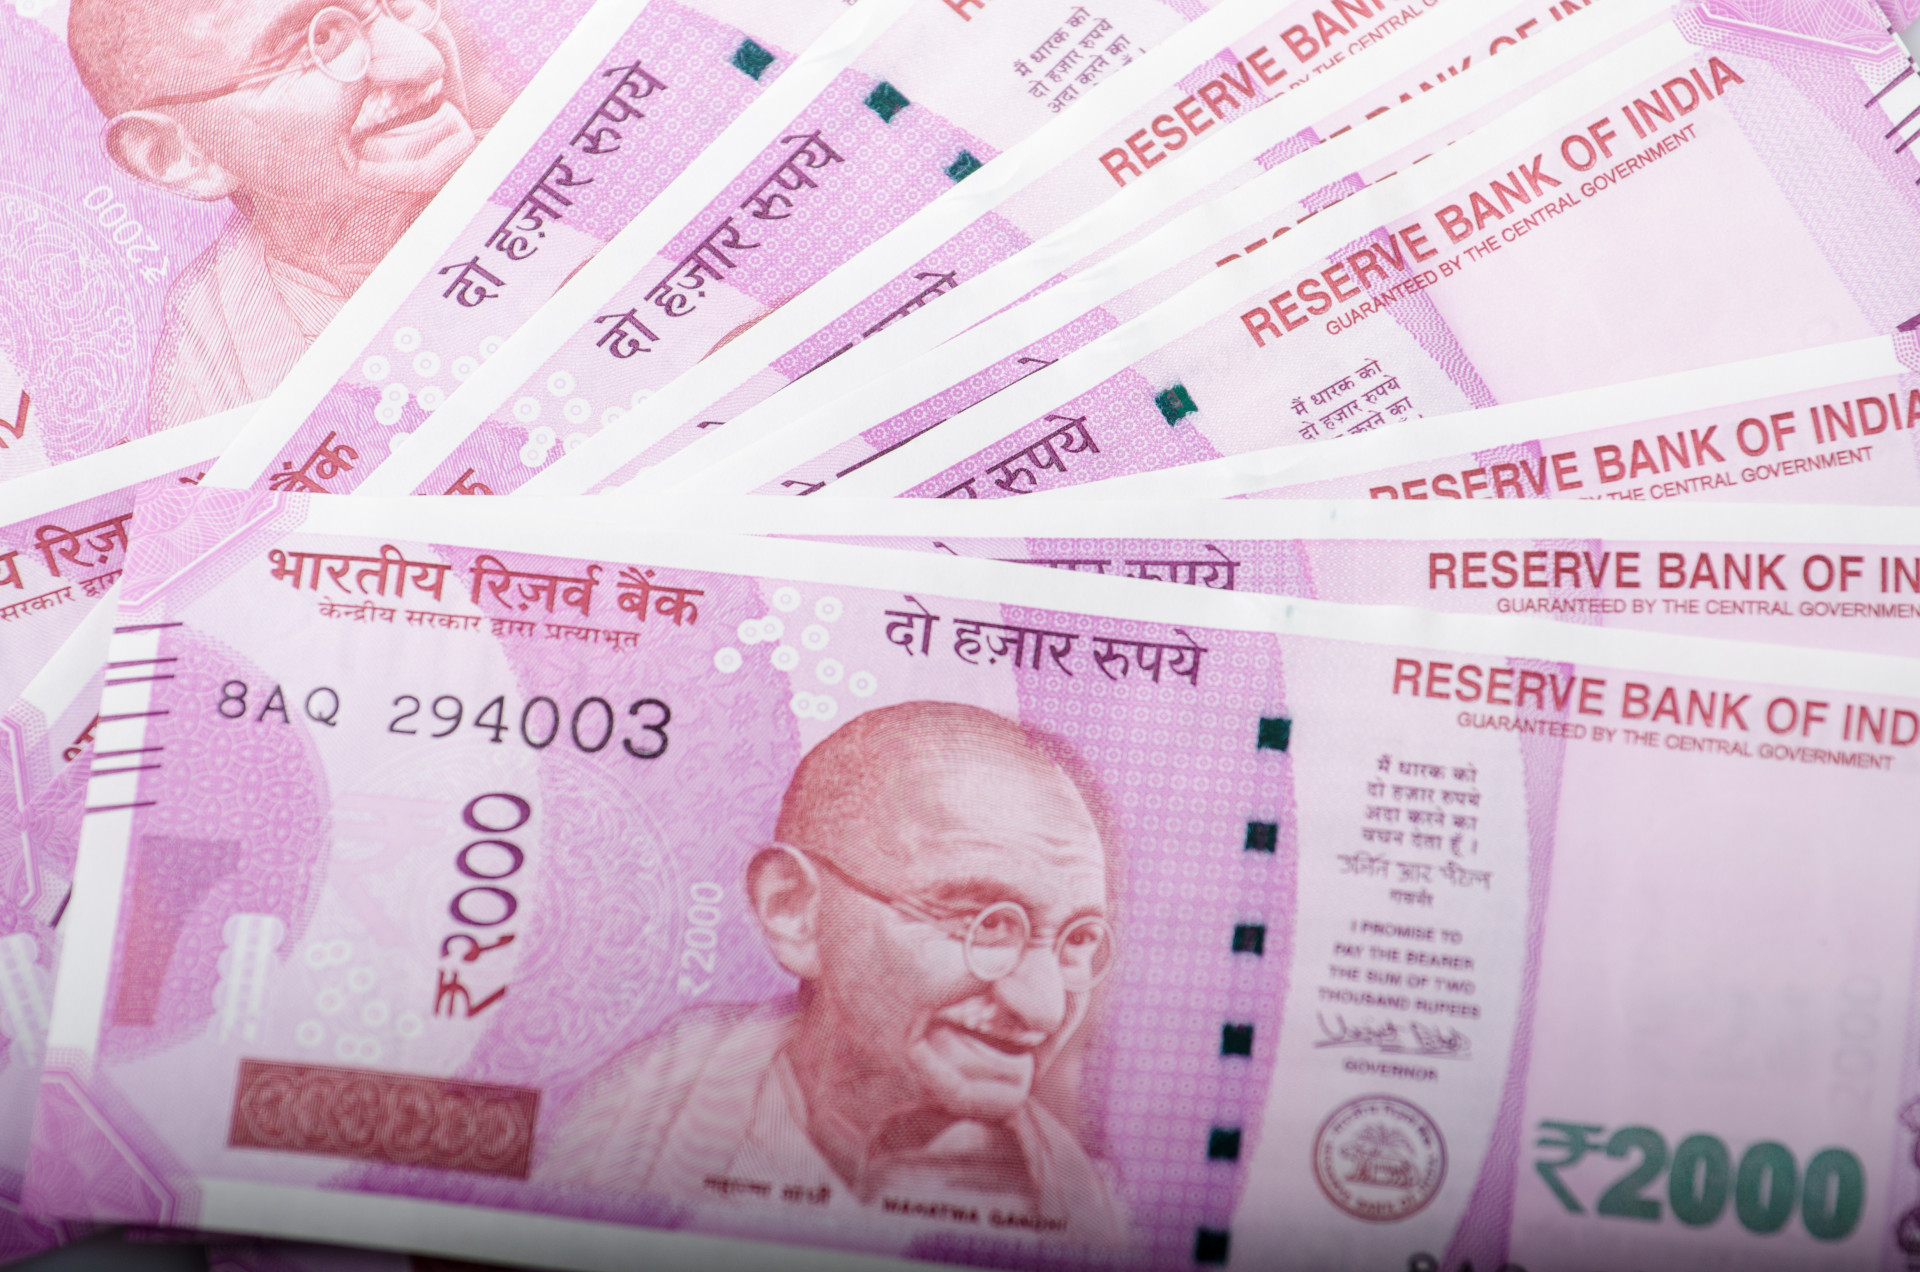 In the country, there are about 2.5 million zero-rupee notes in circulation. They are used by citizens who do not accept requests for bribery from public officials.<p><a href="https://www.msn.com/en-in/community/channel/vid-7xx8mnucu55yw63we9va2gwr7uihbxwc68fxqp25x6tg4ftibpra?cvid=94631541bc0f4f89bfd59158d696ad7e">Follow us and access great exclusive content every day</a></p>